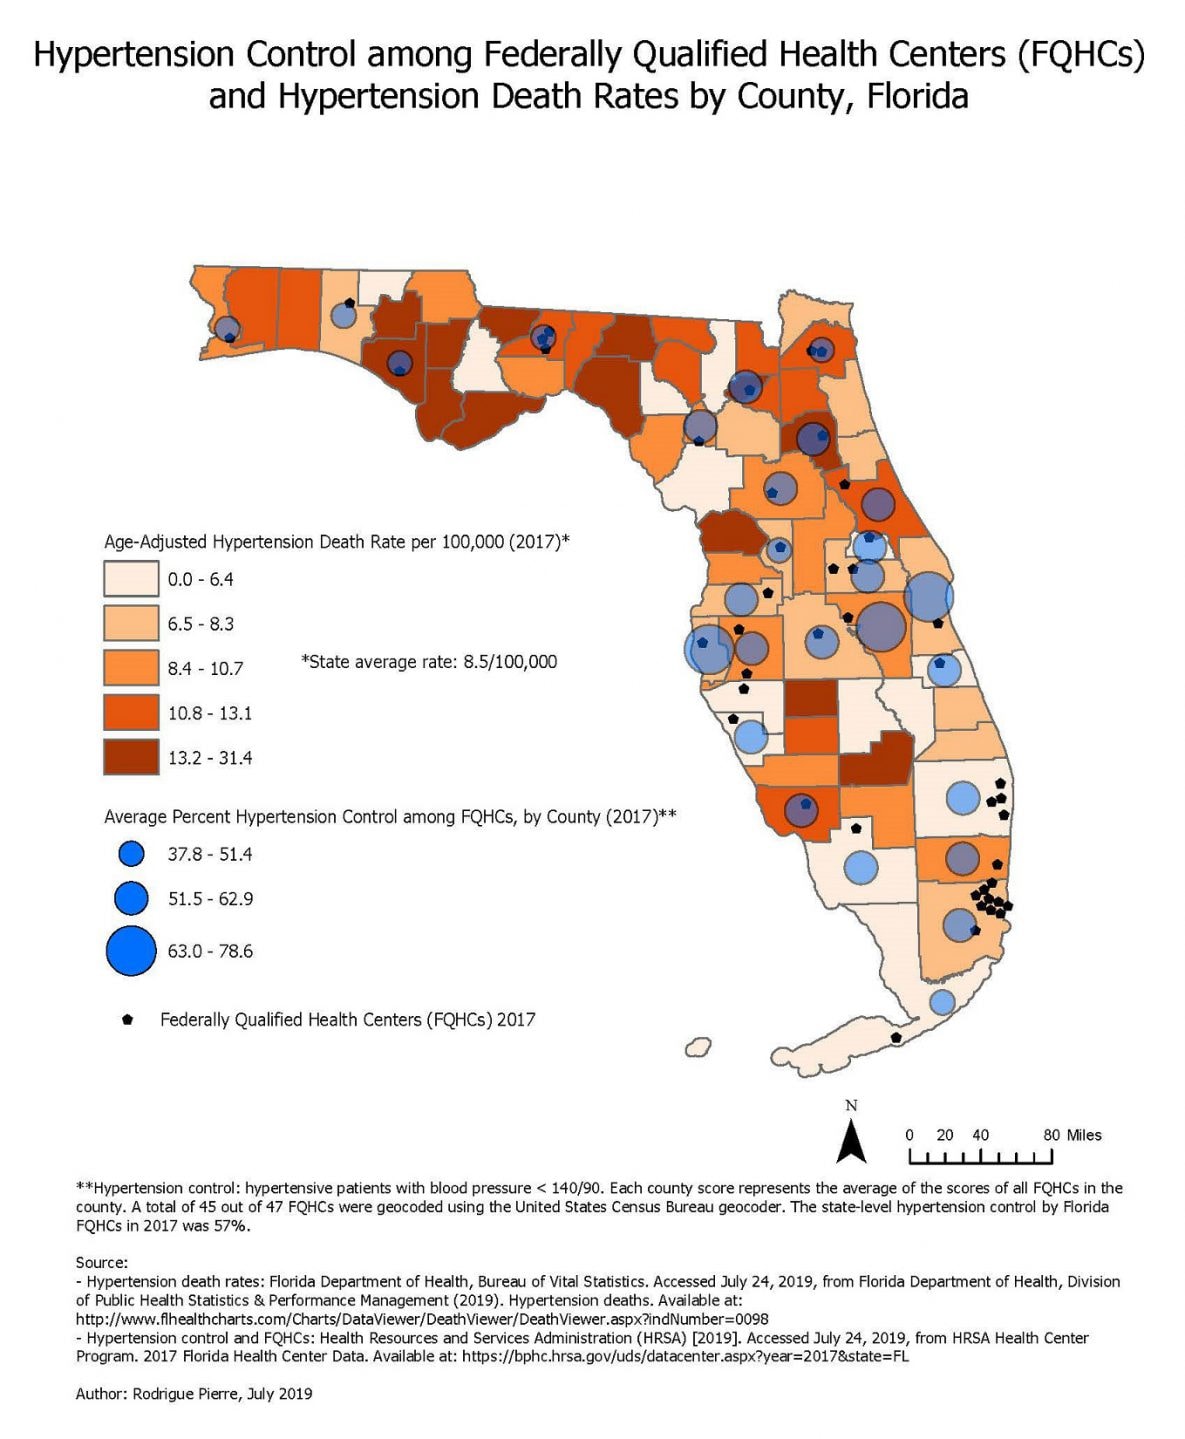 This map shows hypertension age-adjusted death rates at the county level and the distribution of 45 out of 47 FQHCs across Florida counties along with their average county-level hypertension control in 2017. A total of 47 FQHCs are listed on the HRSA-funded Health Center Awardees website for Florida for 2017 along with their Uniform Data System (UDS) data. However, during the geocoding process, a match was not found for two of the FQHCs, one in Pinellas County and one in Broward County. For counties with several FQHCs, an average hypertension control score was calculated per county.   The average hypertension death rate in Florida in 2017 was 8.5 per 100,000. The counties in the top quintile (death rates 13.2 - 31.4 per 100,000), mostly located in the northern regions of the state, were Bay, Calhoun, Citrus, Franklin, Gadsden, Glades, Gulf, Hardee, Madison, Putnam, Taylor, Union, and Washington Counties. Among them, only Bay, Putnam, and Union Counties have FQHCs located within their respective geographic boundaries. Counties with no county-specific FQHCs however, may be covered by FQHCs located in bordering counties; this is the case, for example, for Madison and Gadsden Counties that rely on neighboring Leon County’s FQHCs.  The average hypertension control attained by all FQHCs was 57 percent and the highest scores (i.e., top quintile 63.0 percent - 78.6 percent) were recorded in Brevard, Osceola, and Pinellas Counties.